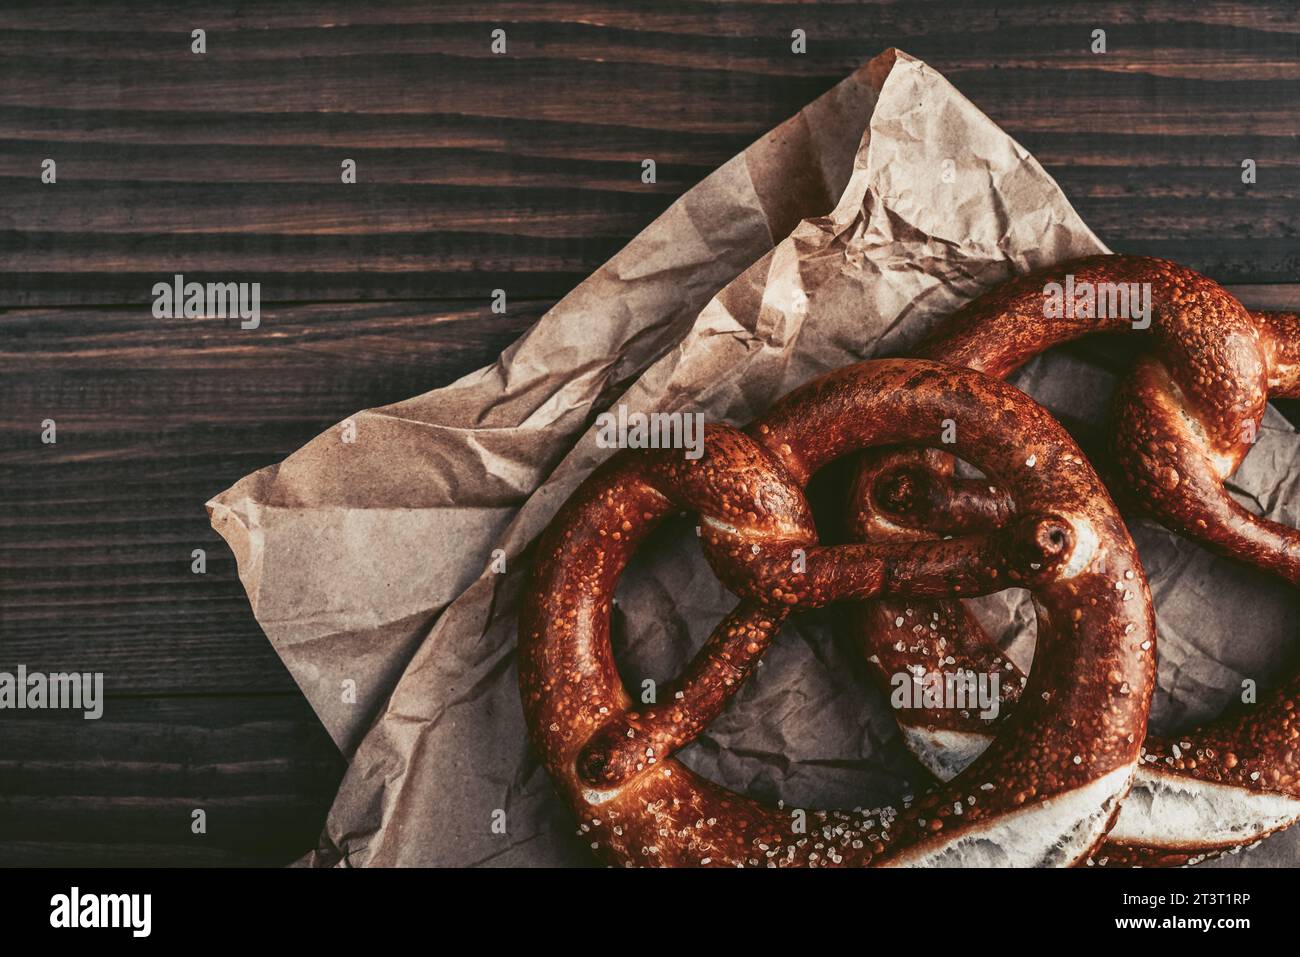 Two soft pretzels with sesame seeds on wooden background, top view Stock Photo